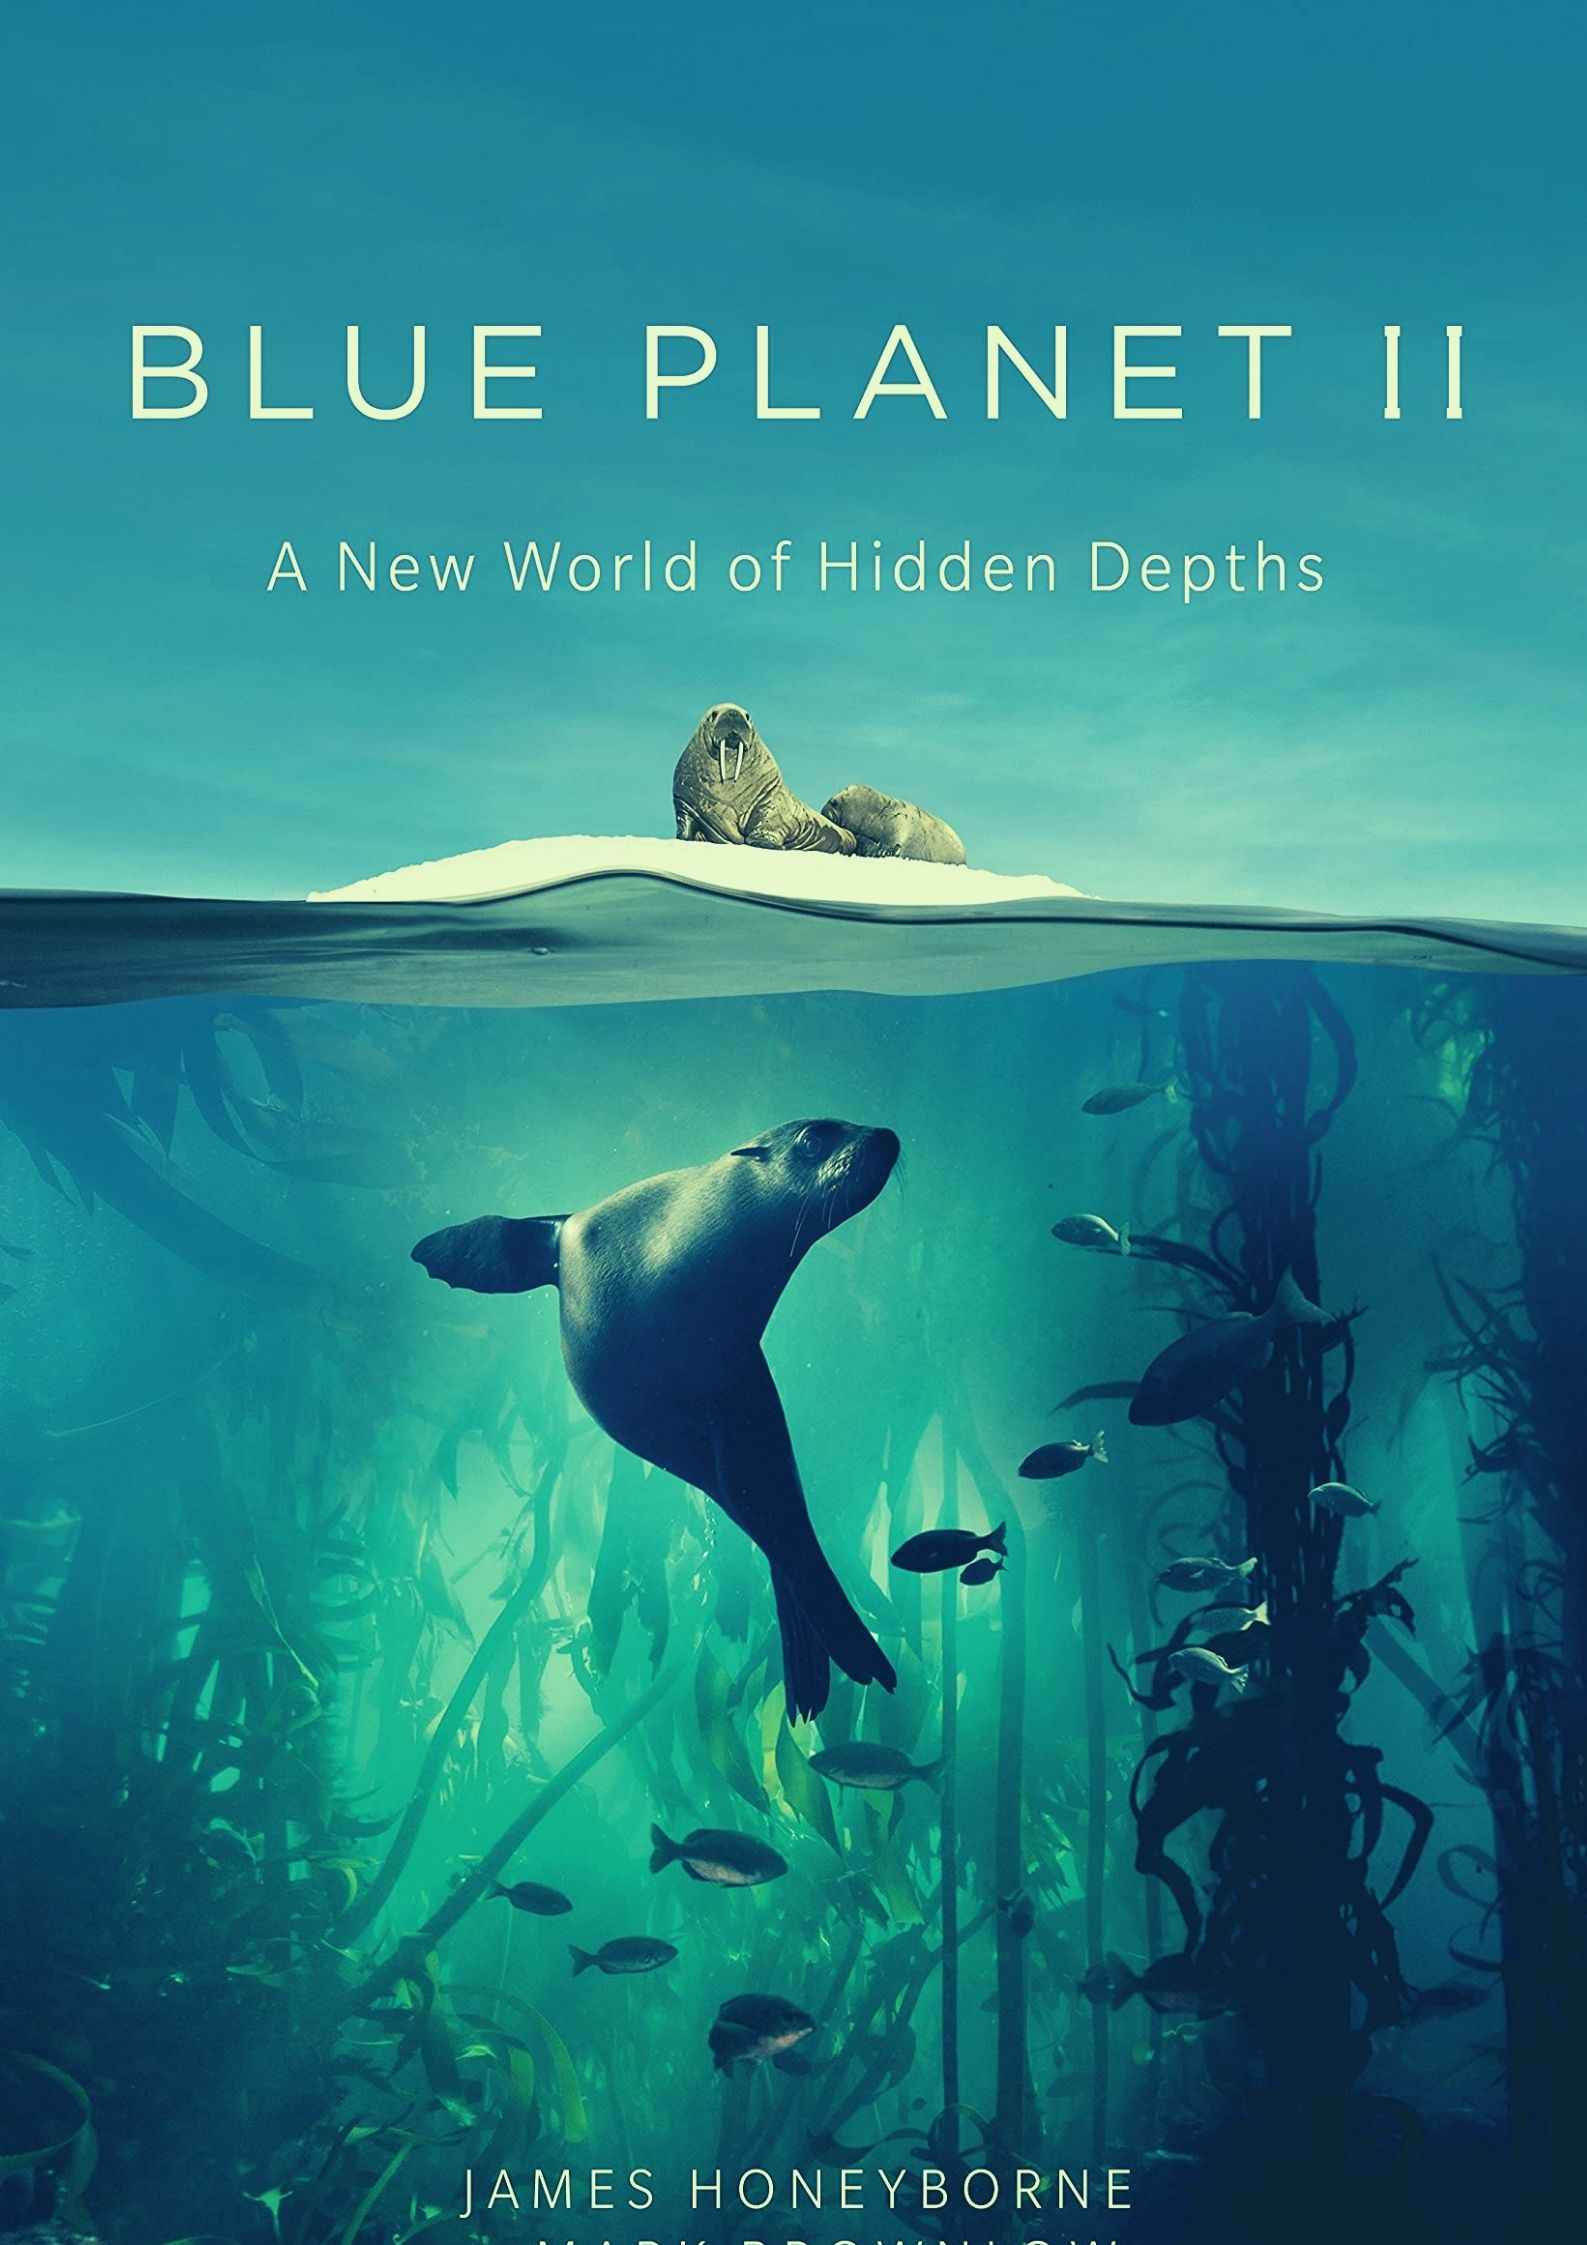 Blue Planet II Parents Guide | Blue Planet II Age Rating 2017